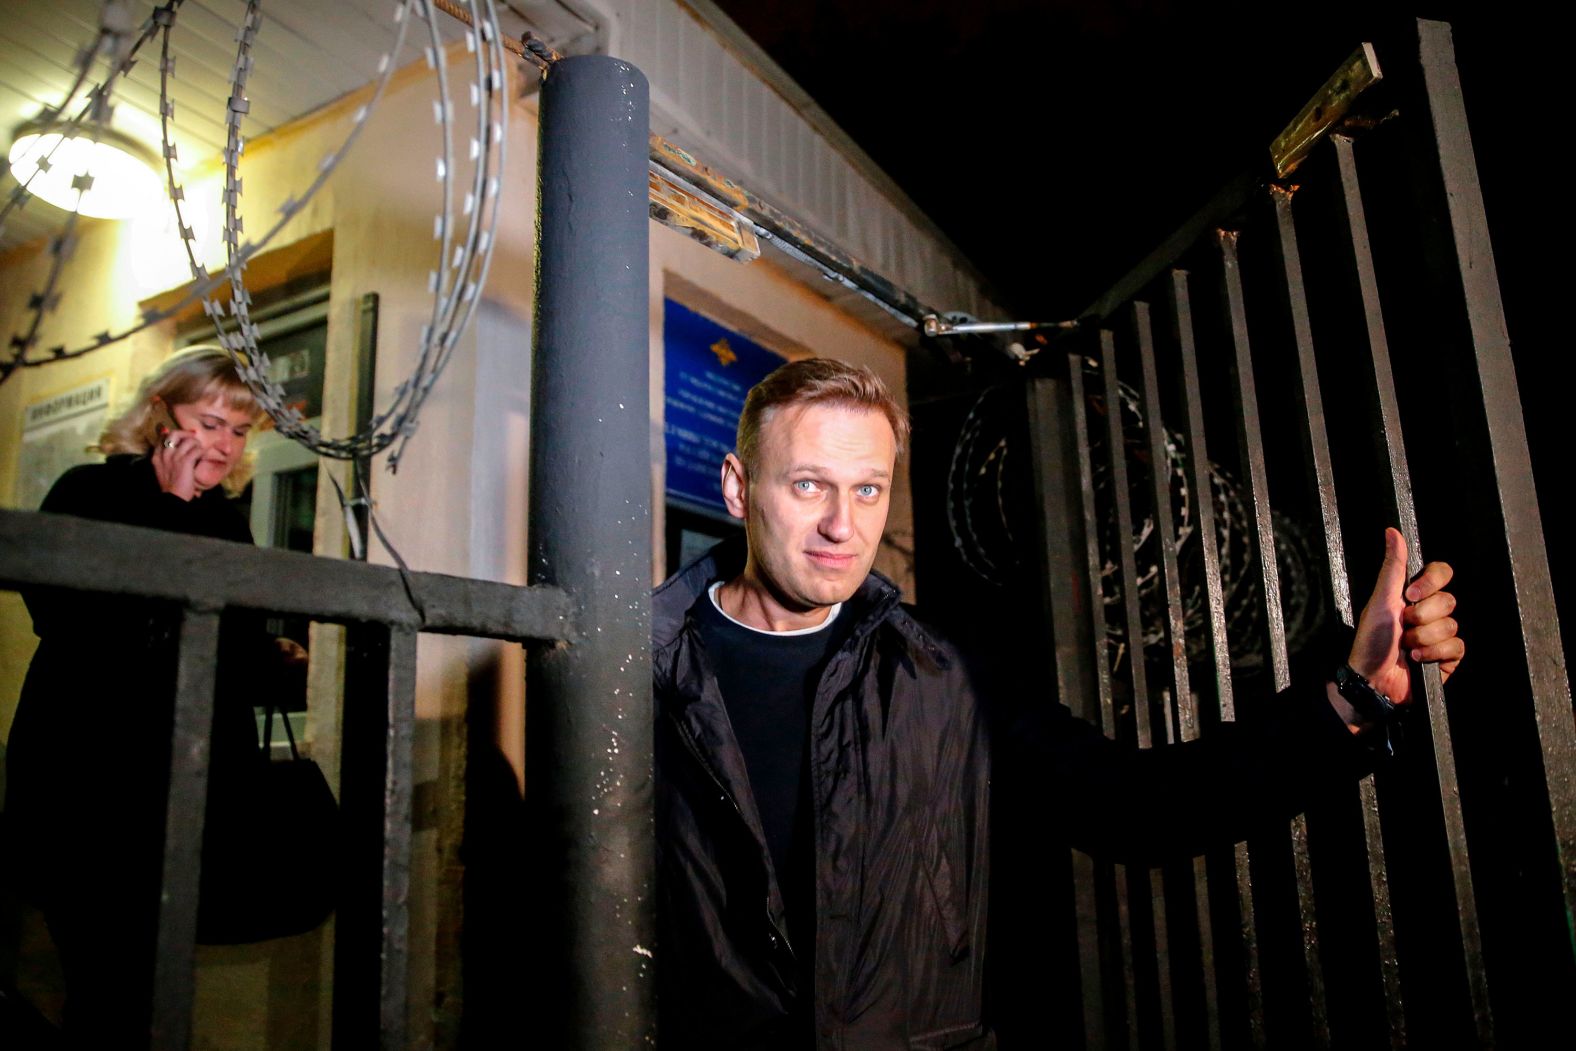 Navalny leaves a police station in Moscow in September 2017. He was detained earlier in the day ahead of a rally, and he was to face a court hearing in Moscow over repeatedly violating a law on organizing public meetings.